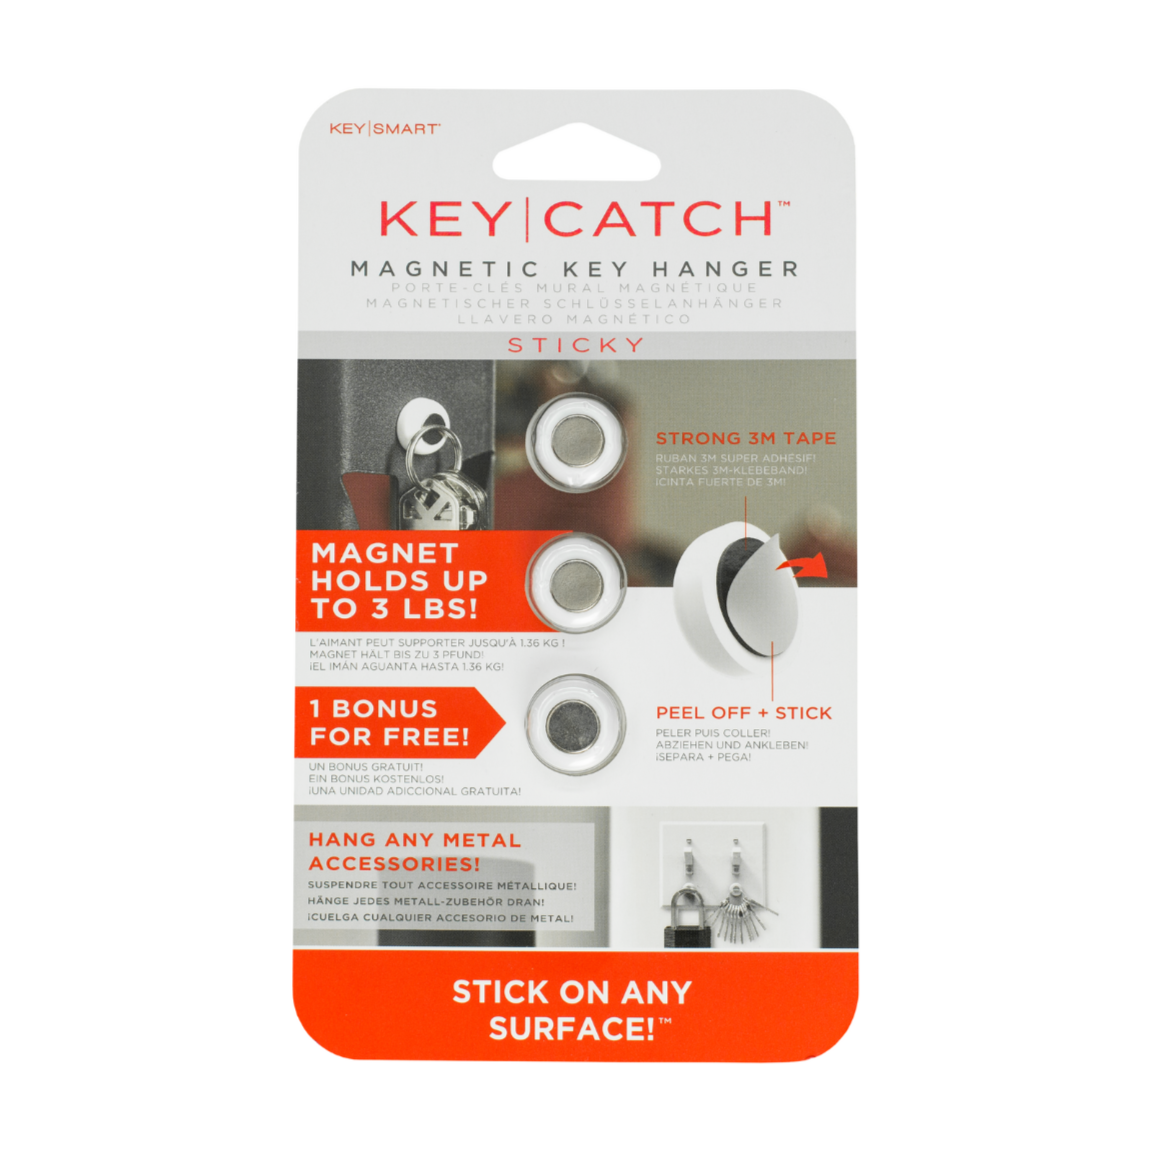 Product_Image_KeyCatch_1200x_1200_BEST.png